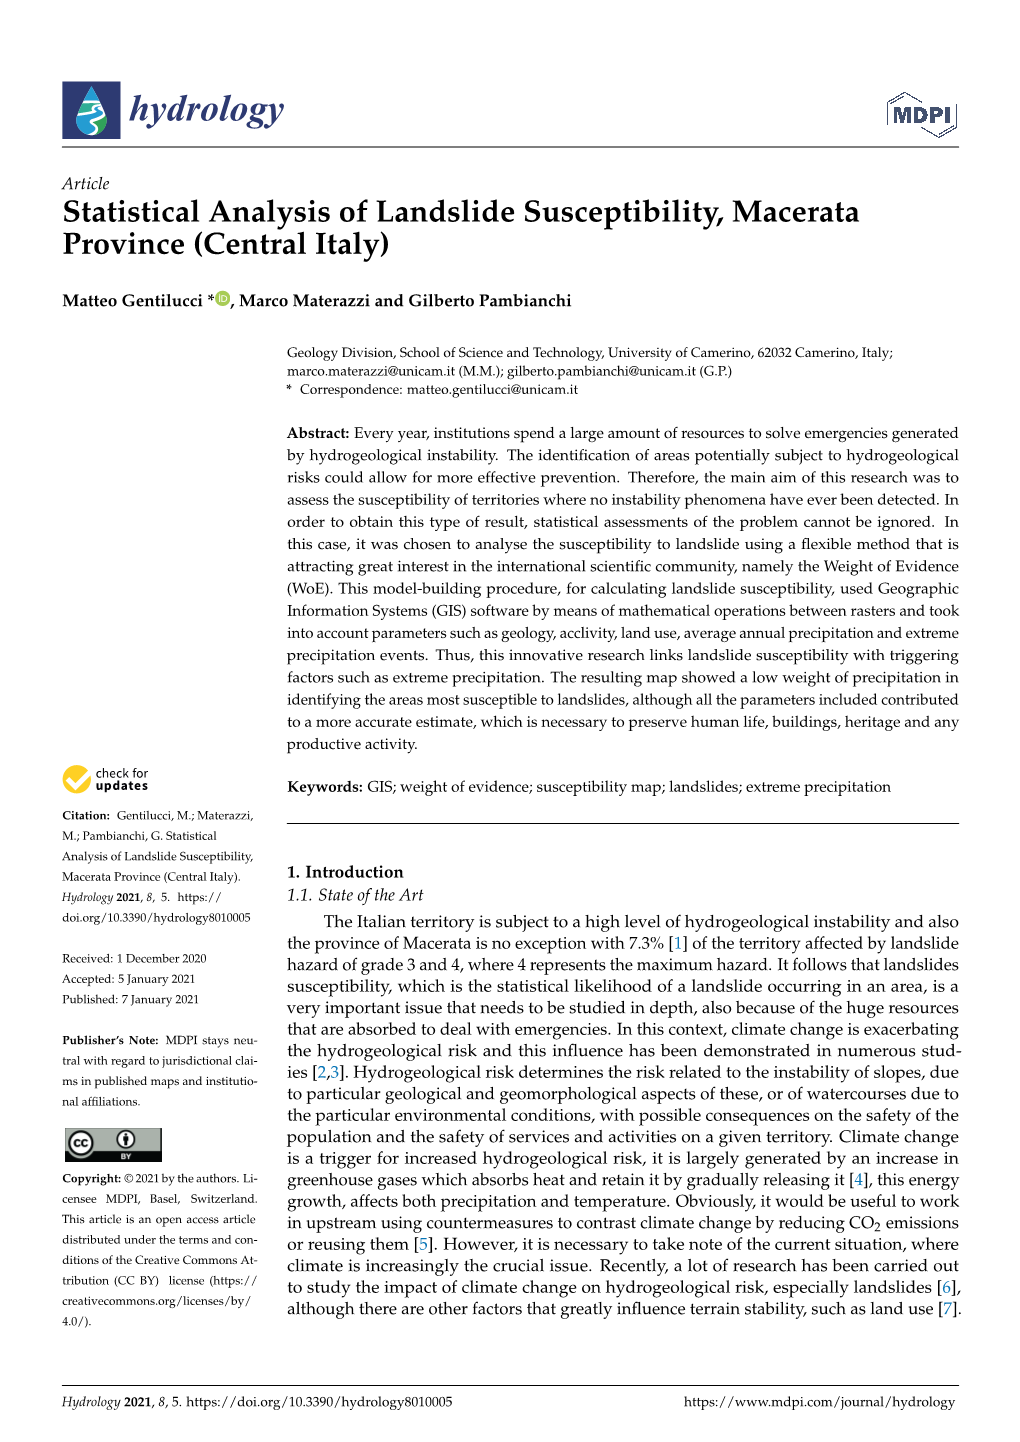 Statistical Analysis of Landslide Susceptibility, Macerata Province (Central Italy)